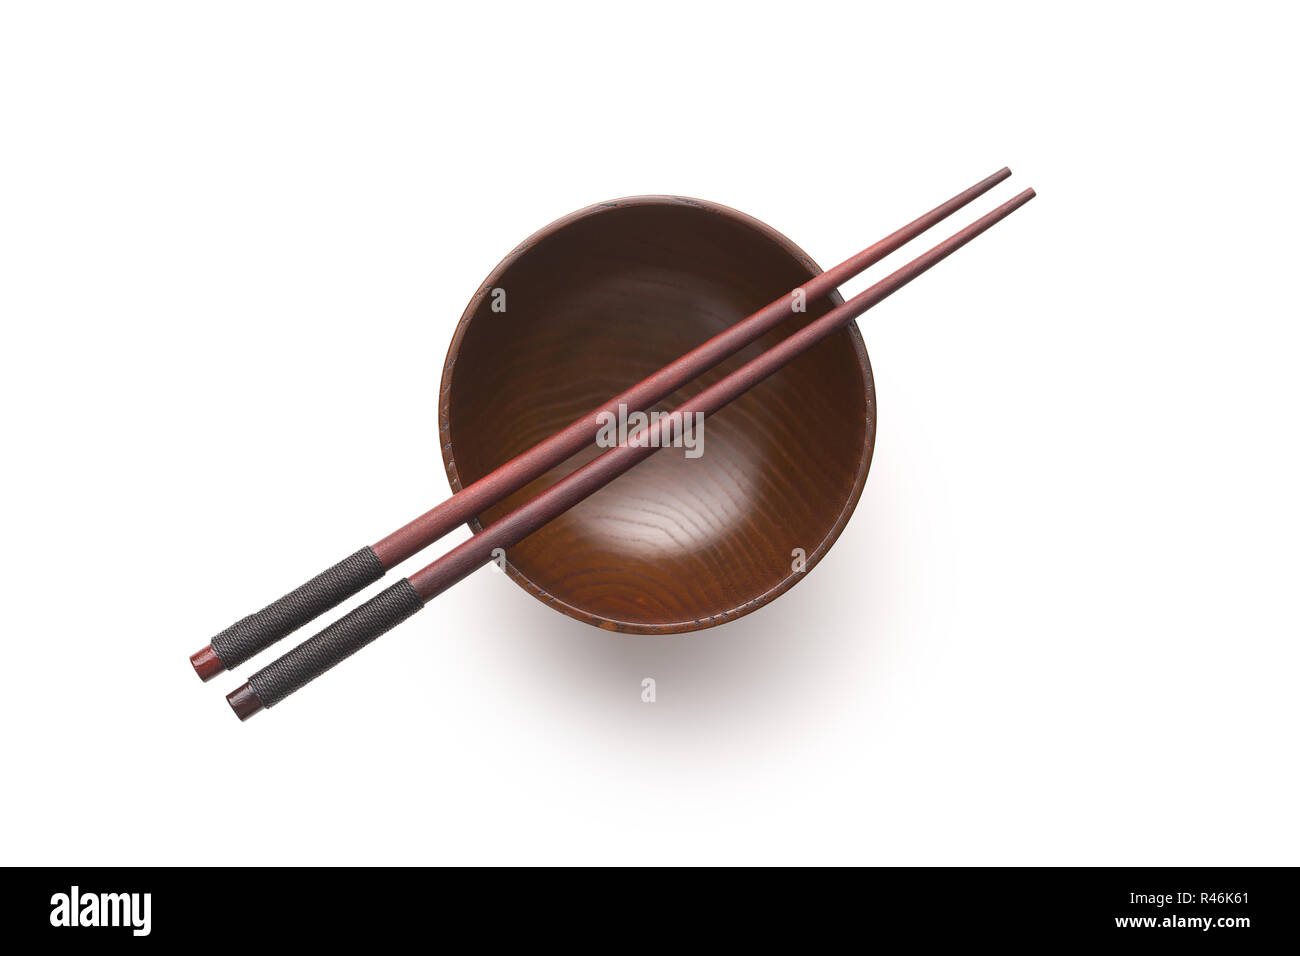 Wooden bowl and chopsticks isolated on white background. Stock Photo